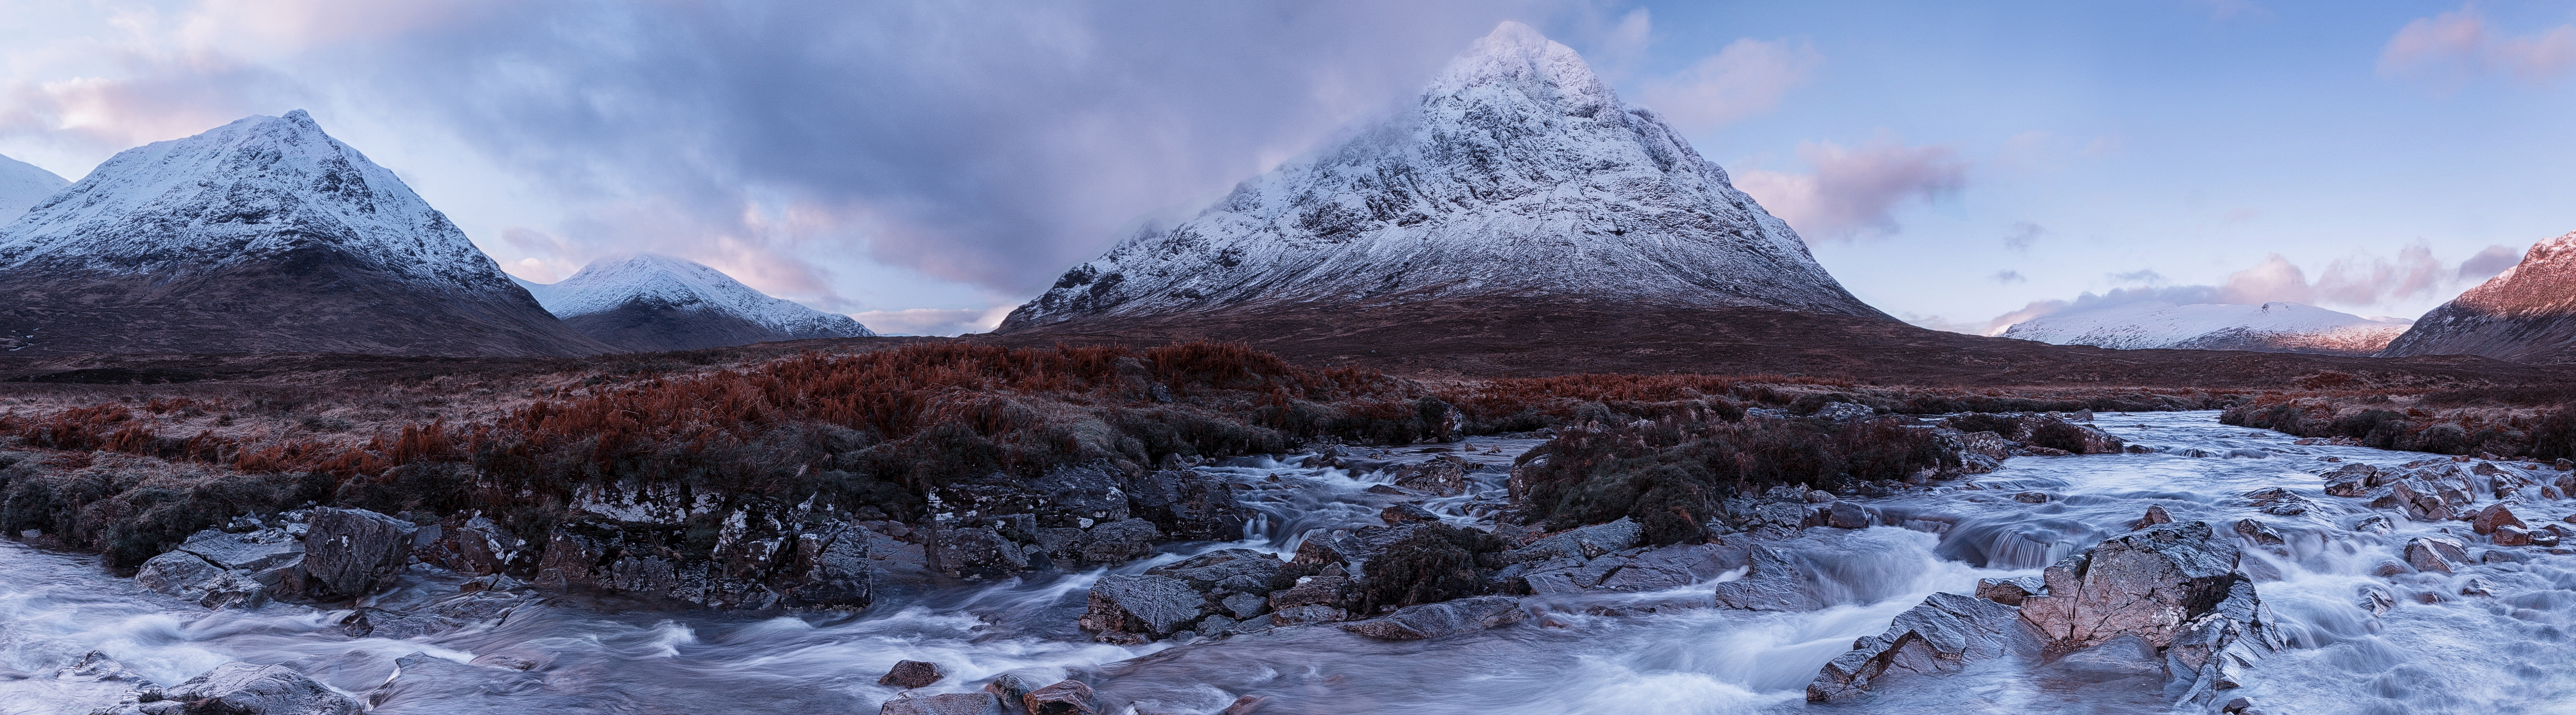 Buachaille Etive Mor And River Coupall, Europe, United Kingdom